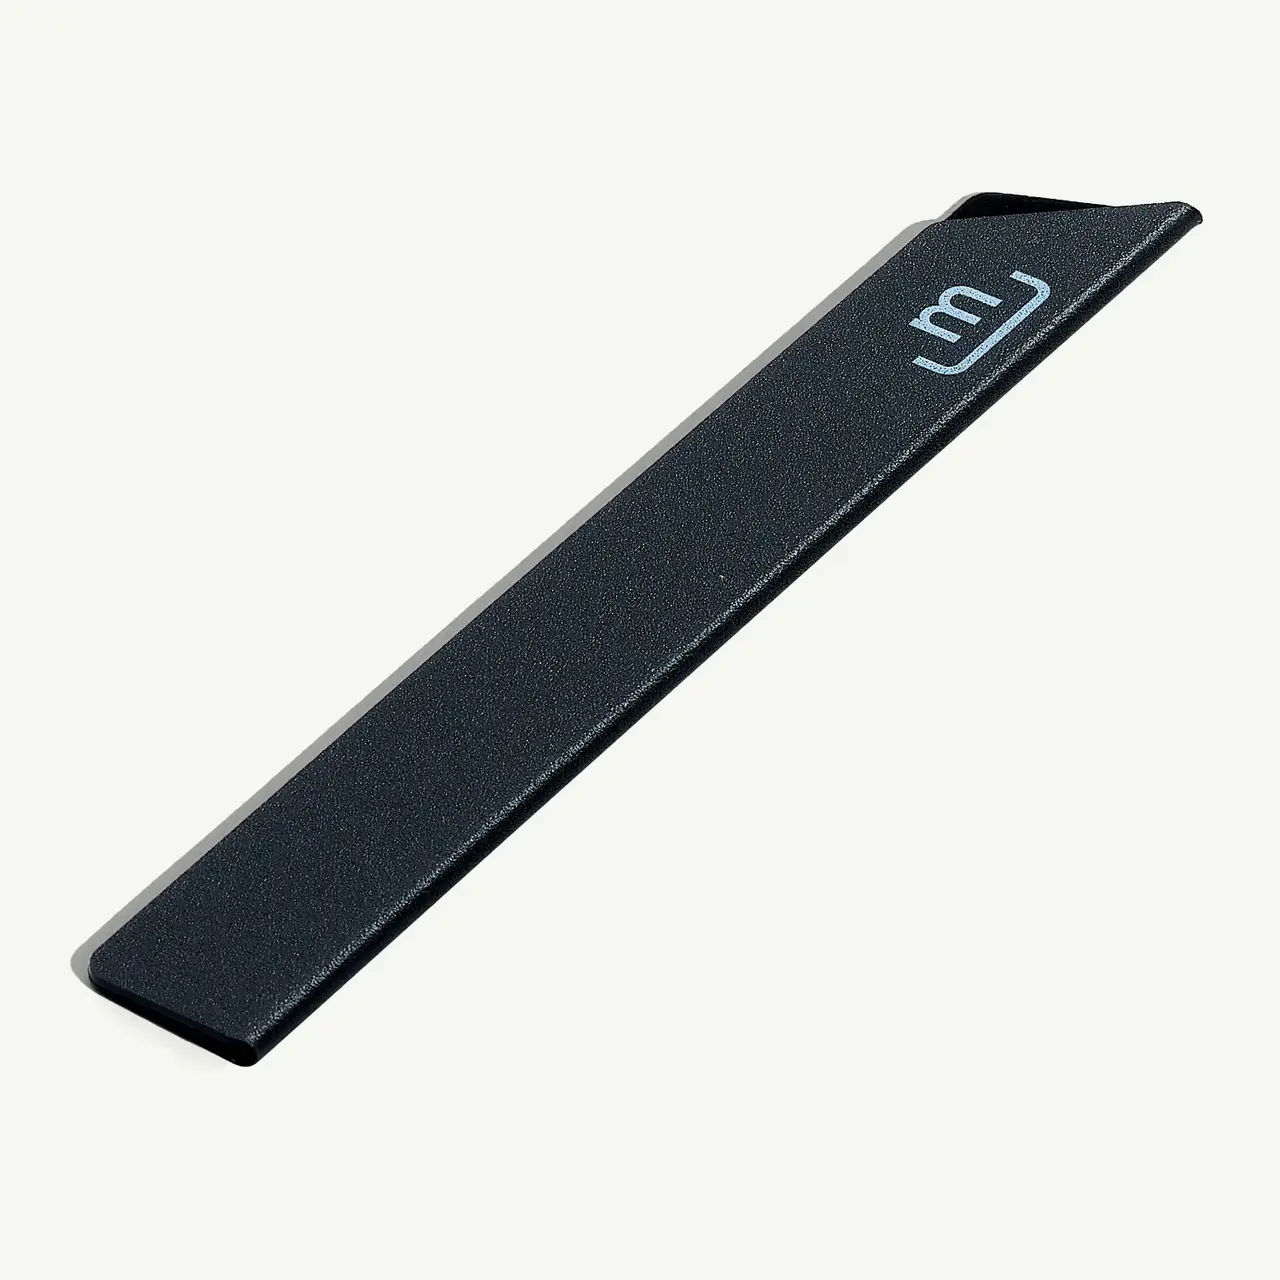 A sleek black vape pen with a logo at the top is displayed on a light background.